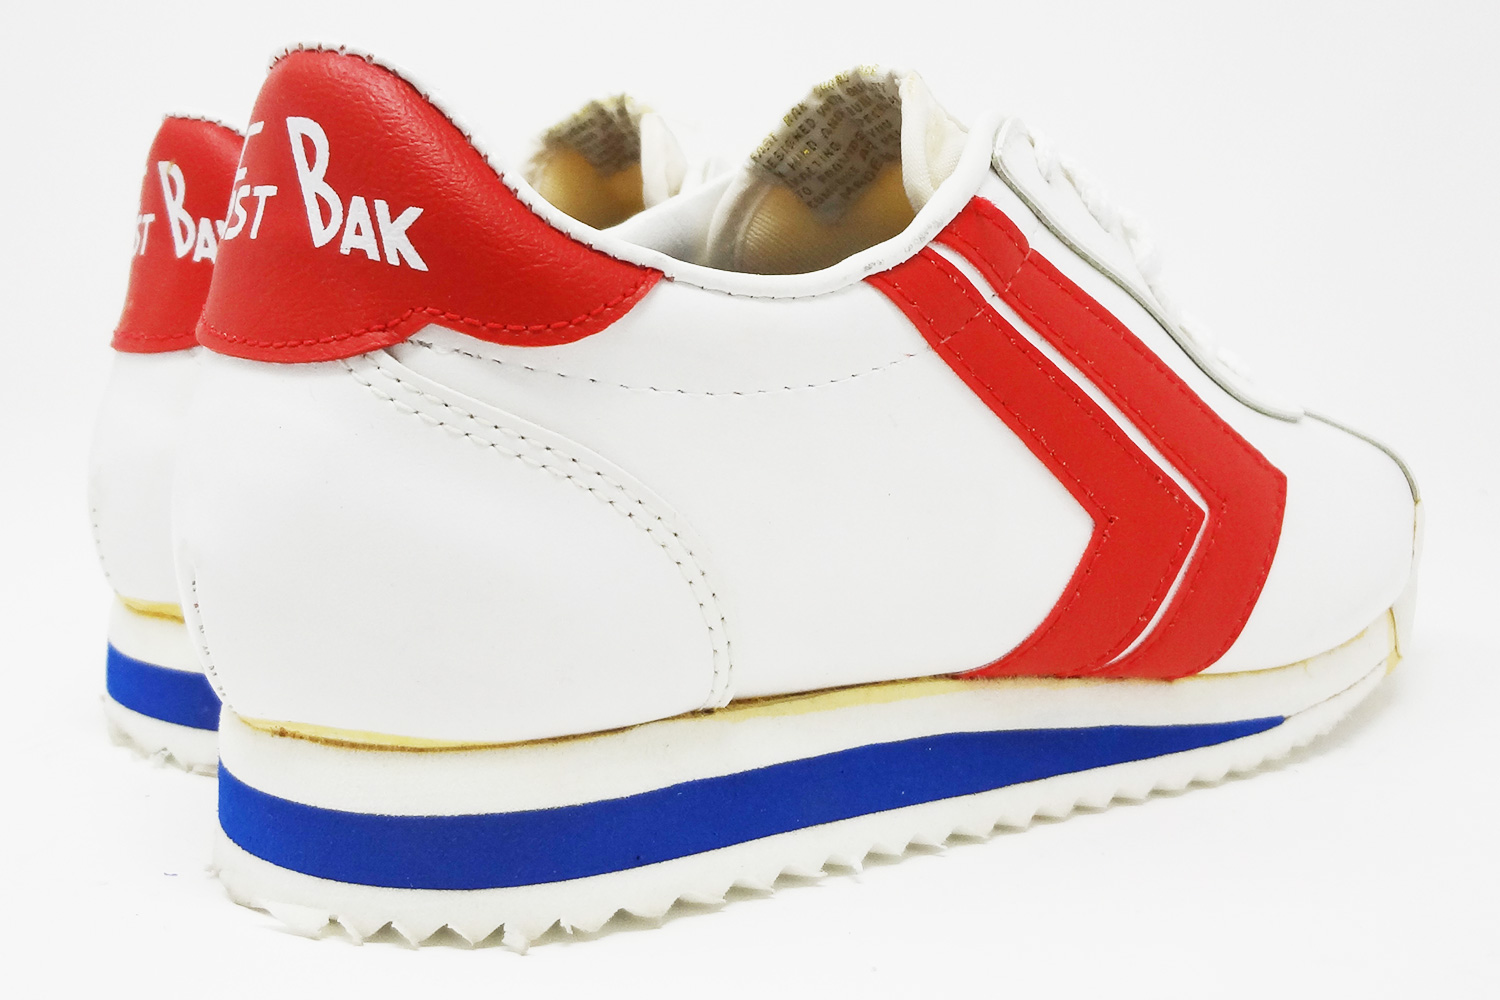 Obscure 1980s Fast Bak vintage Onitsuka Tiger Corsair style sneakers @ The Deffest